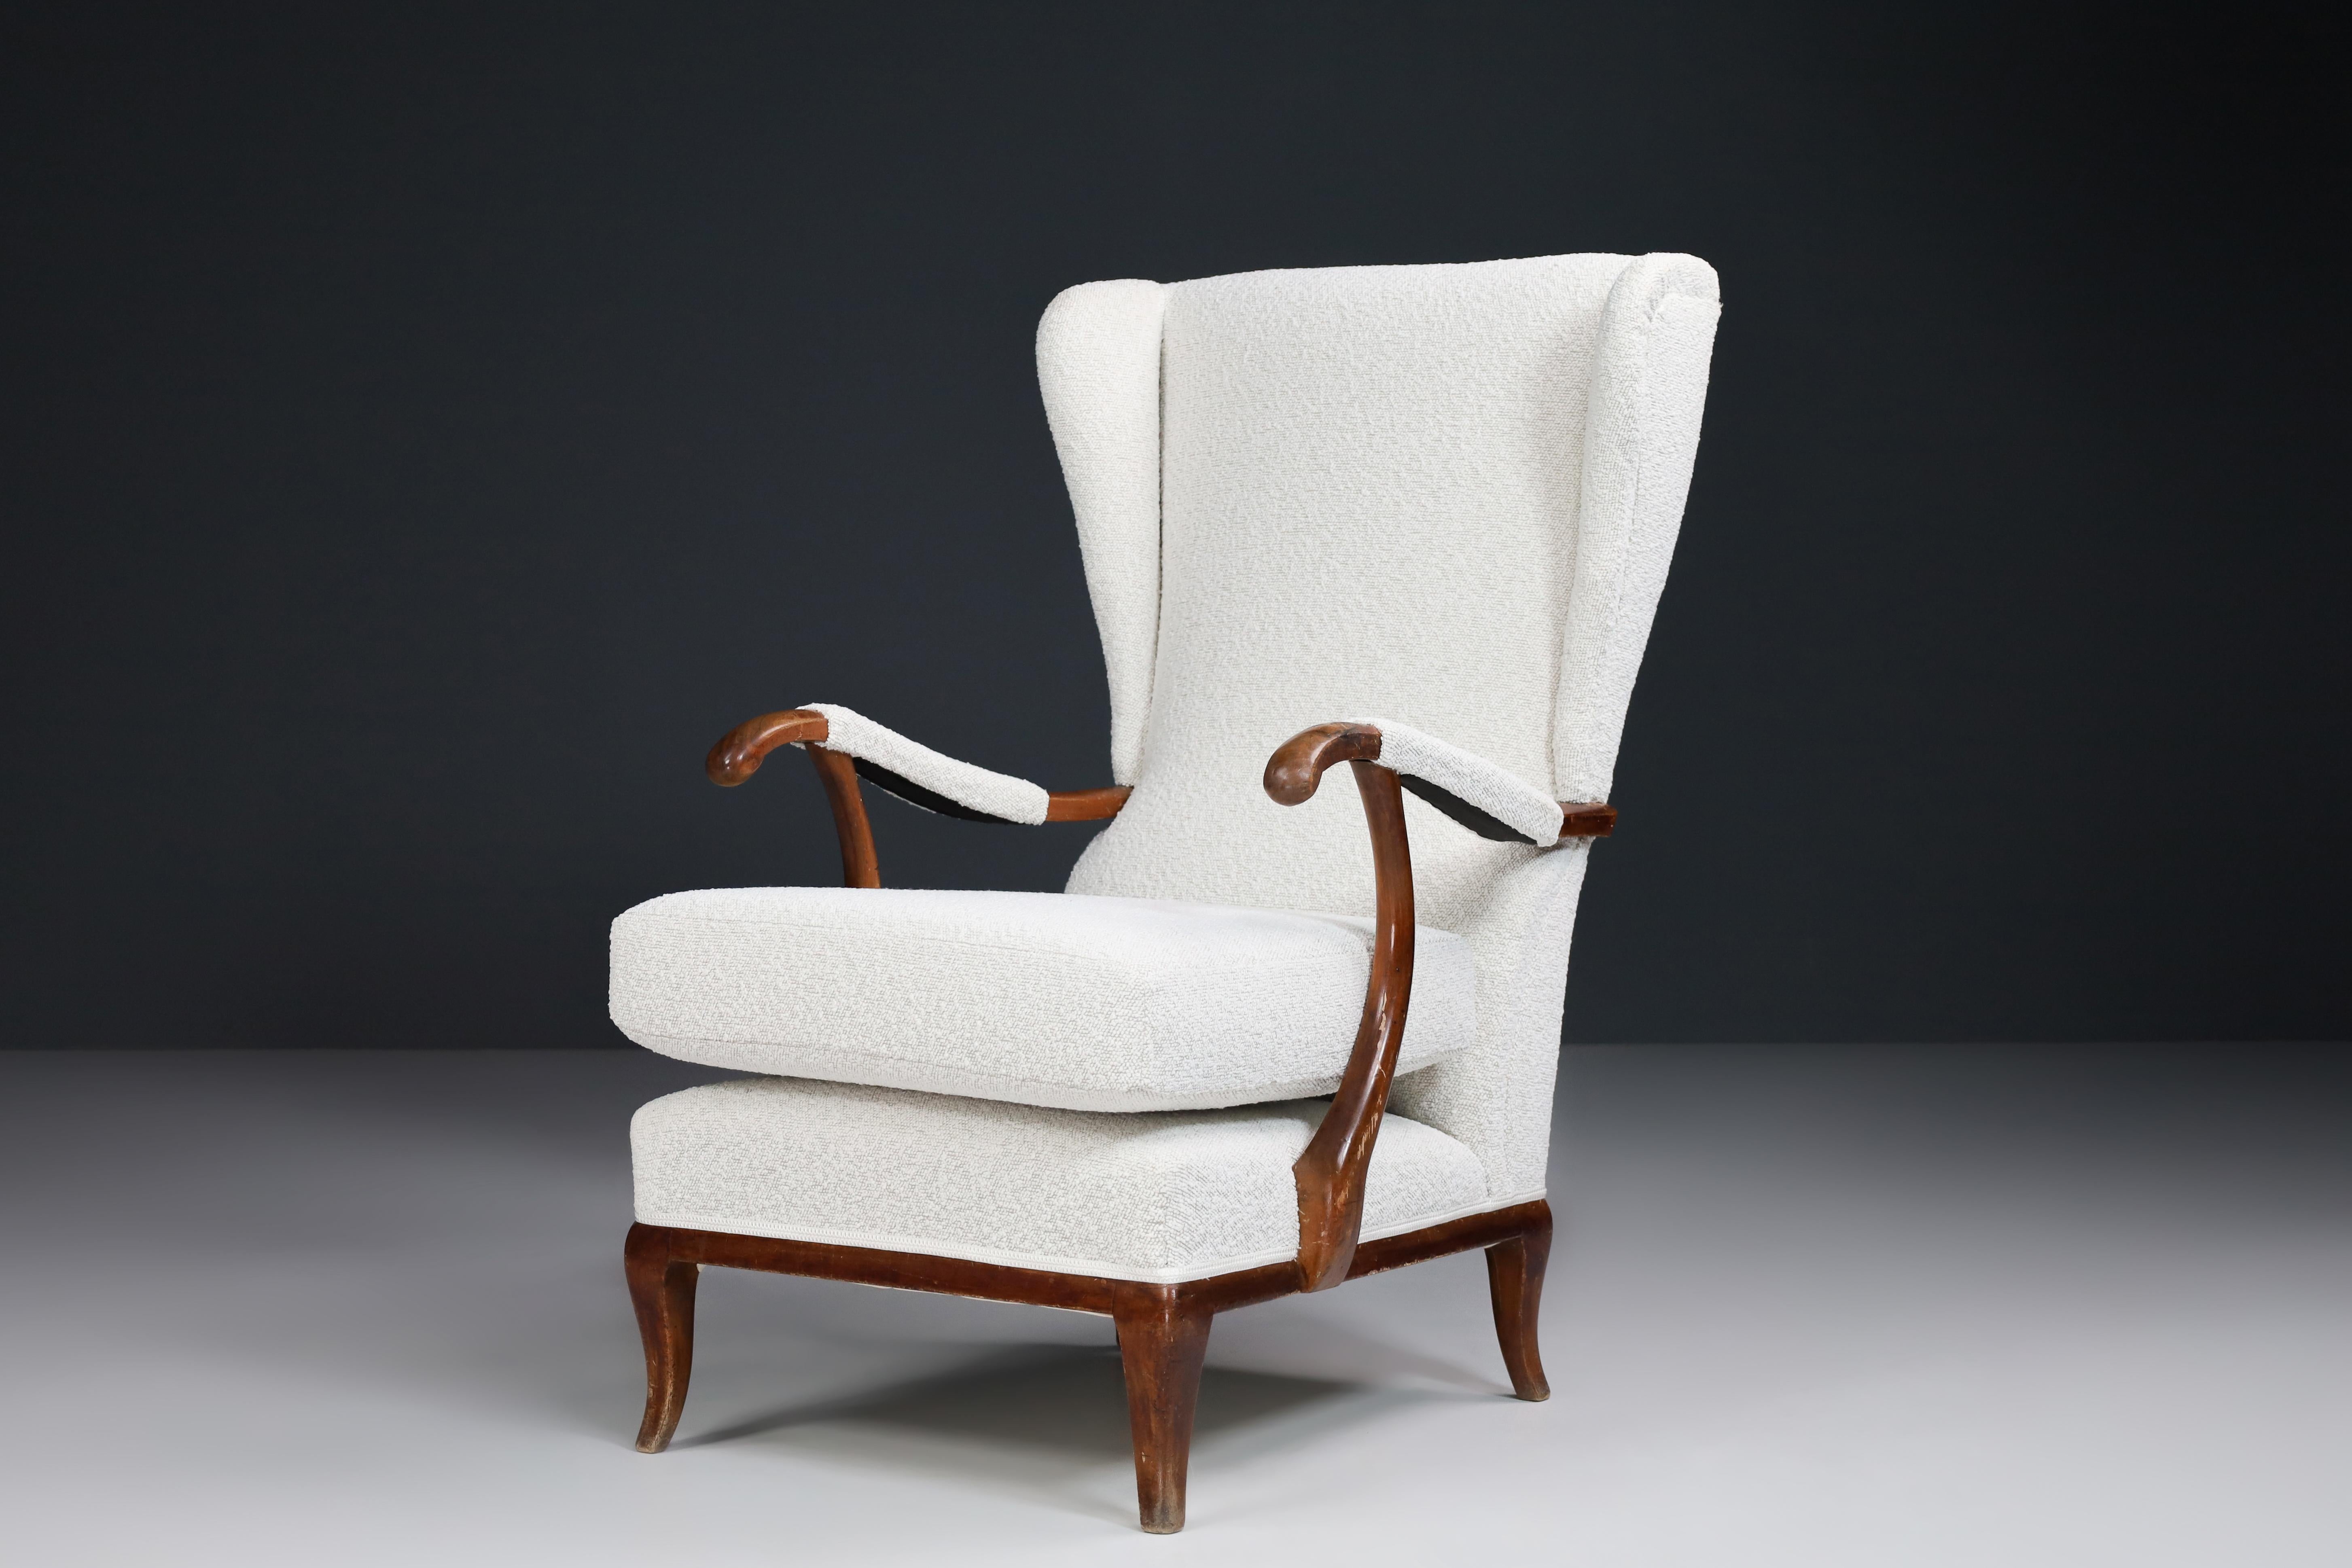 Wingback Armchair by Paolo Buffa Reupholstered in Bouclé Fabric, Italy 1940s

This elegant high-back Paolo Buffa armchair featured a sculpted wingback and armrest was made in Italy in the 1940s. This armchair has just been reupholstered with Bouclé